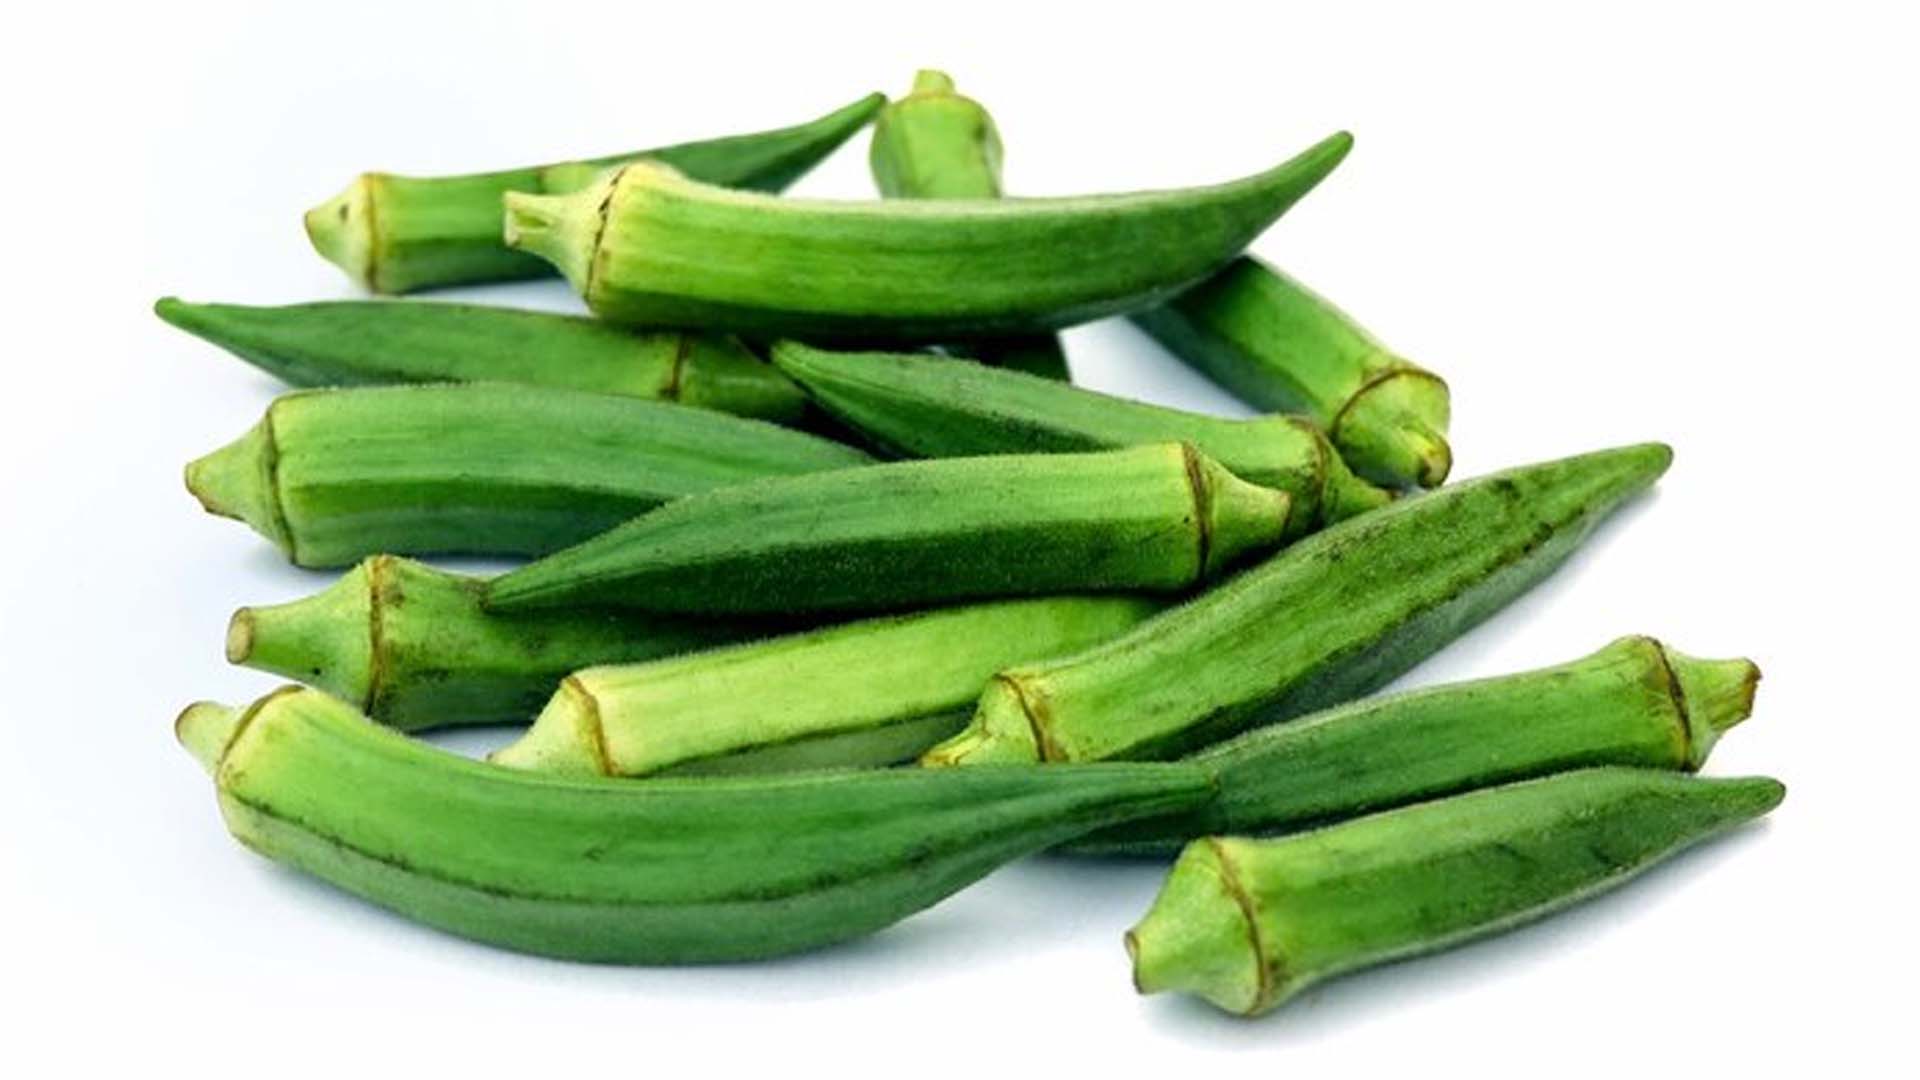 What is the Nutritional Value of Ladyfinger/Okra Per 100g?